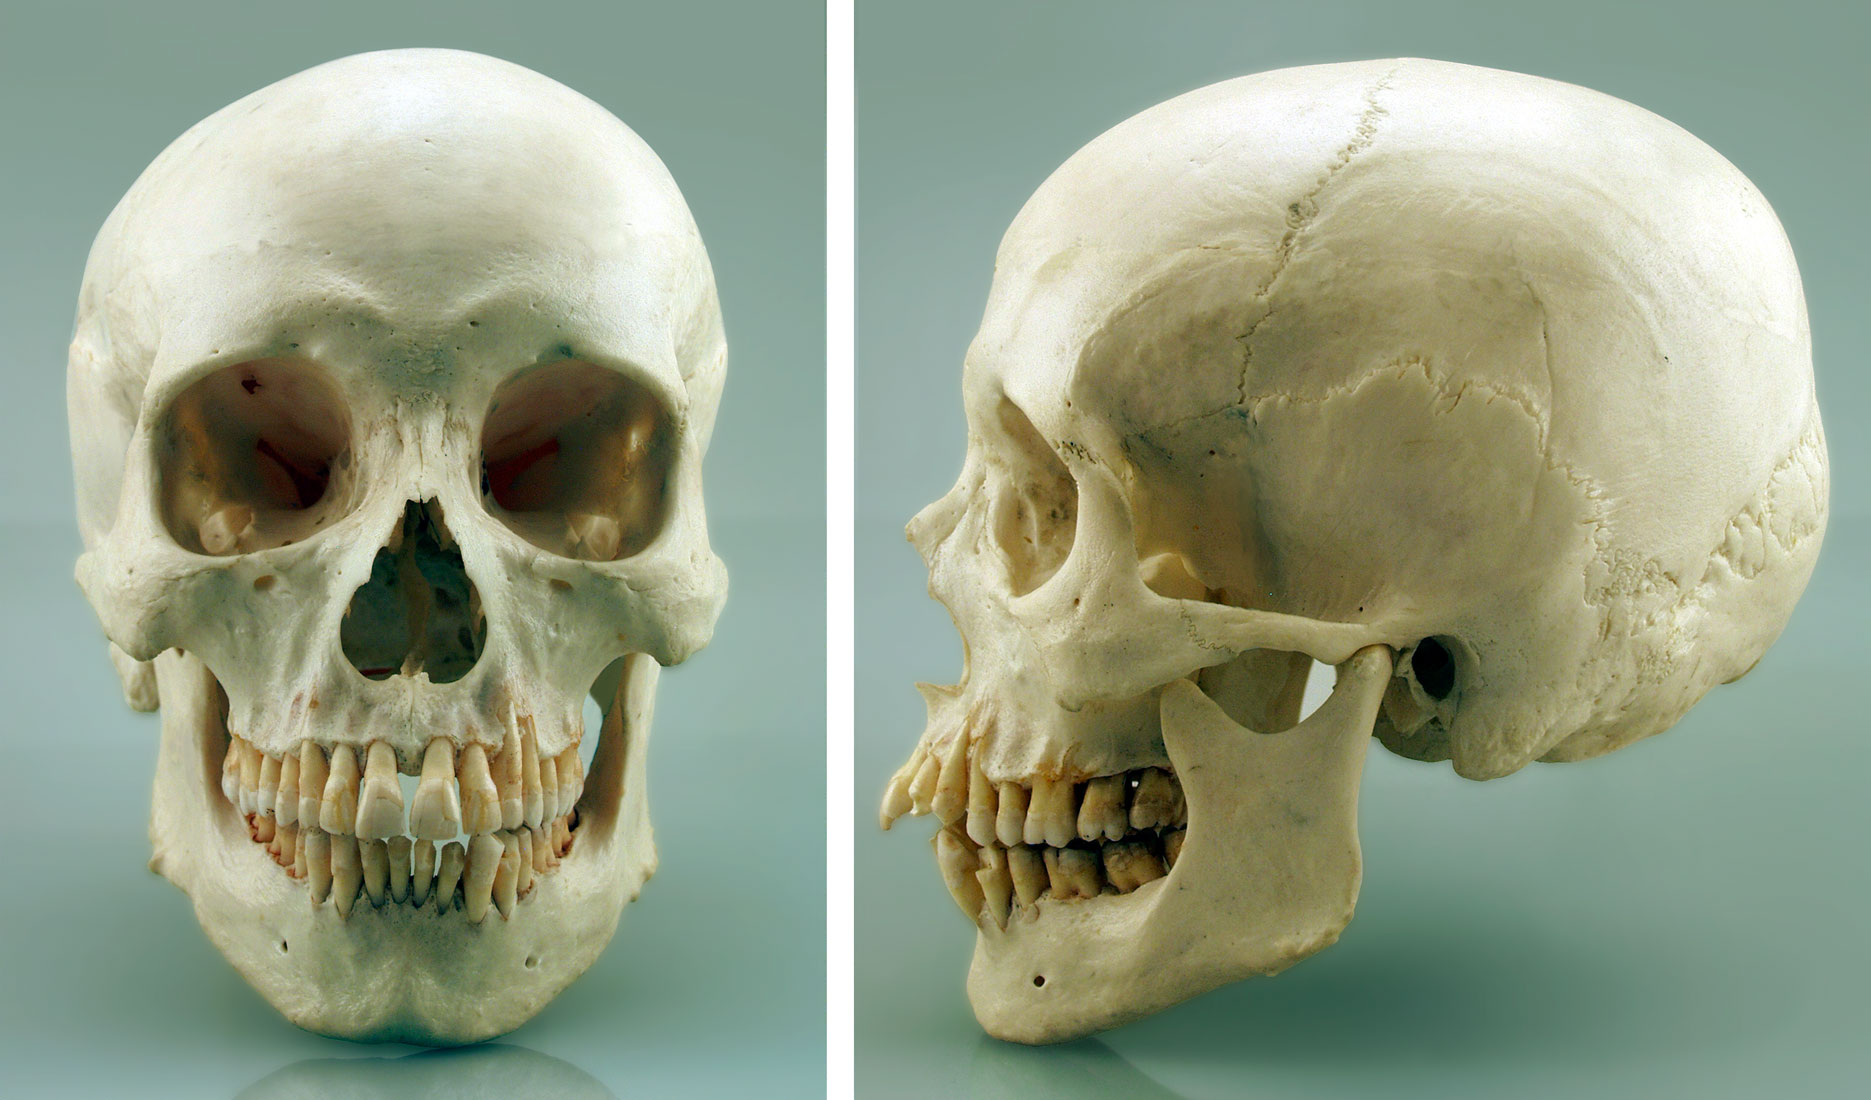 Skull Meaning and Definition